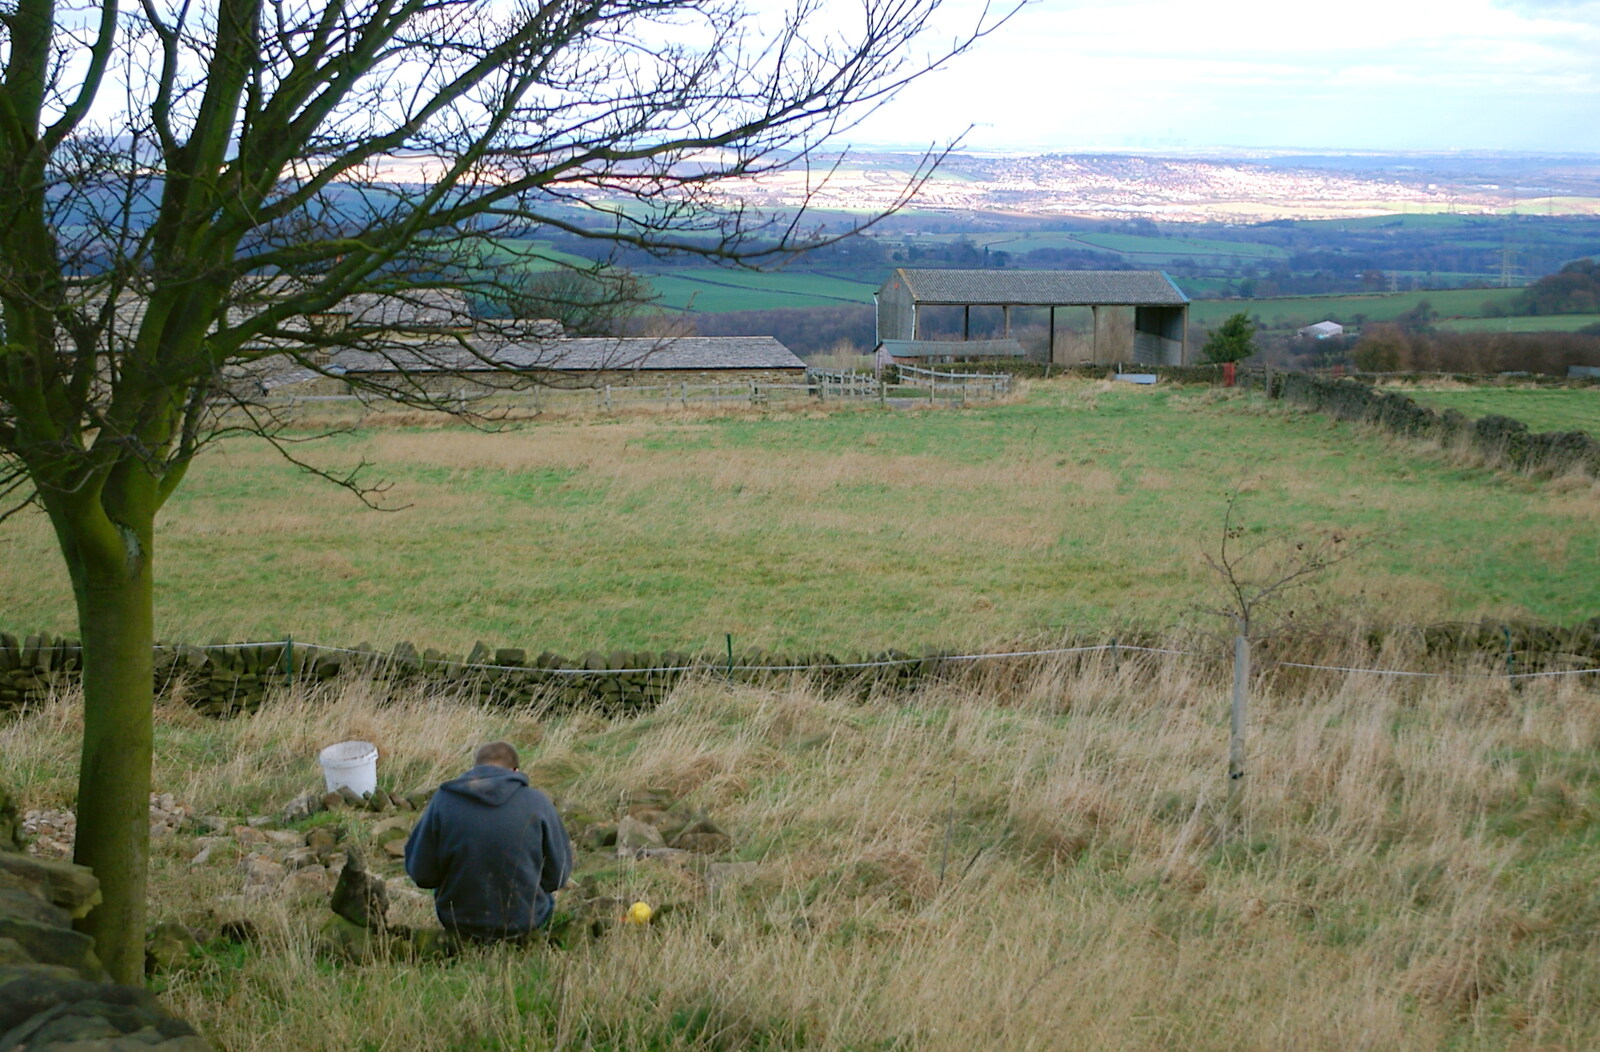 Driving Around Oop North, Hoylandswain, West Yorkshire - 30th January 2005: A young lad does dry-stone walling